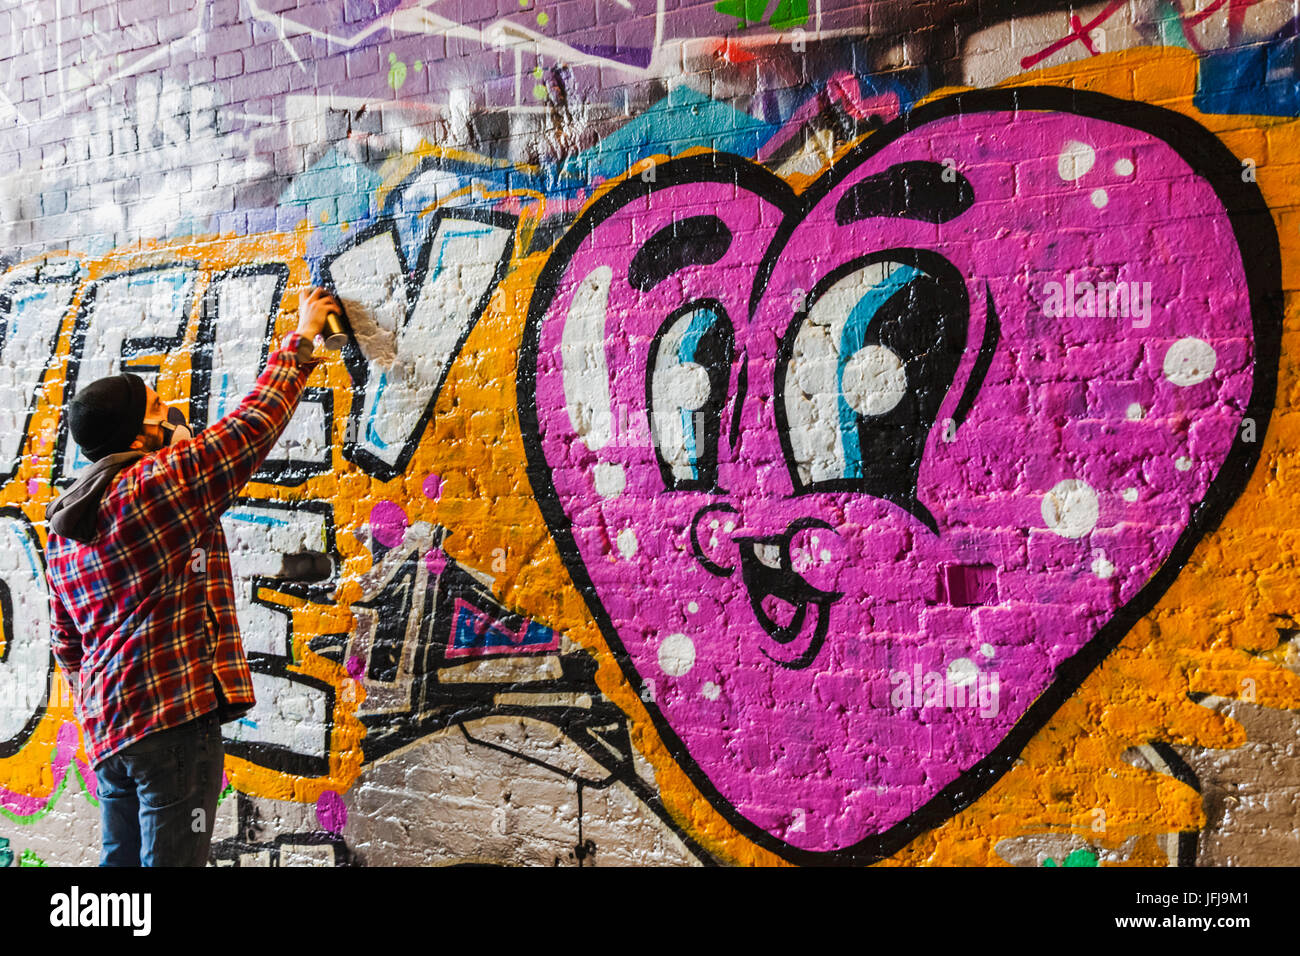 England, London, Lambeth, Waterloo, Leake Street, Graffiti and Wall Art Tunnel, Street Art with Words Lovely Love and Heart Stock Photo